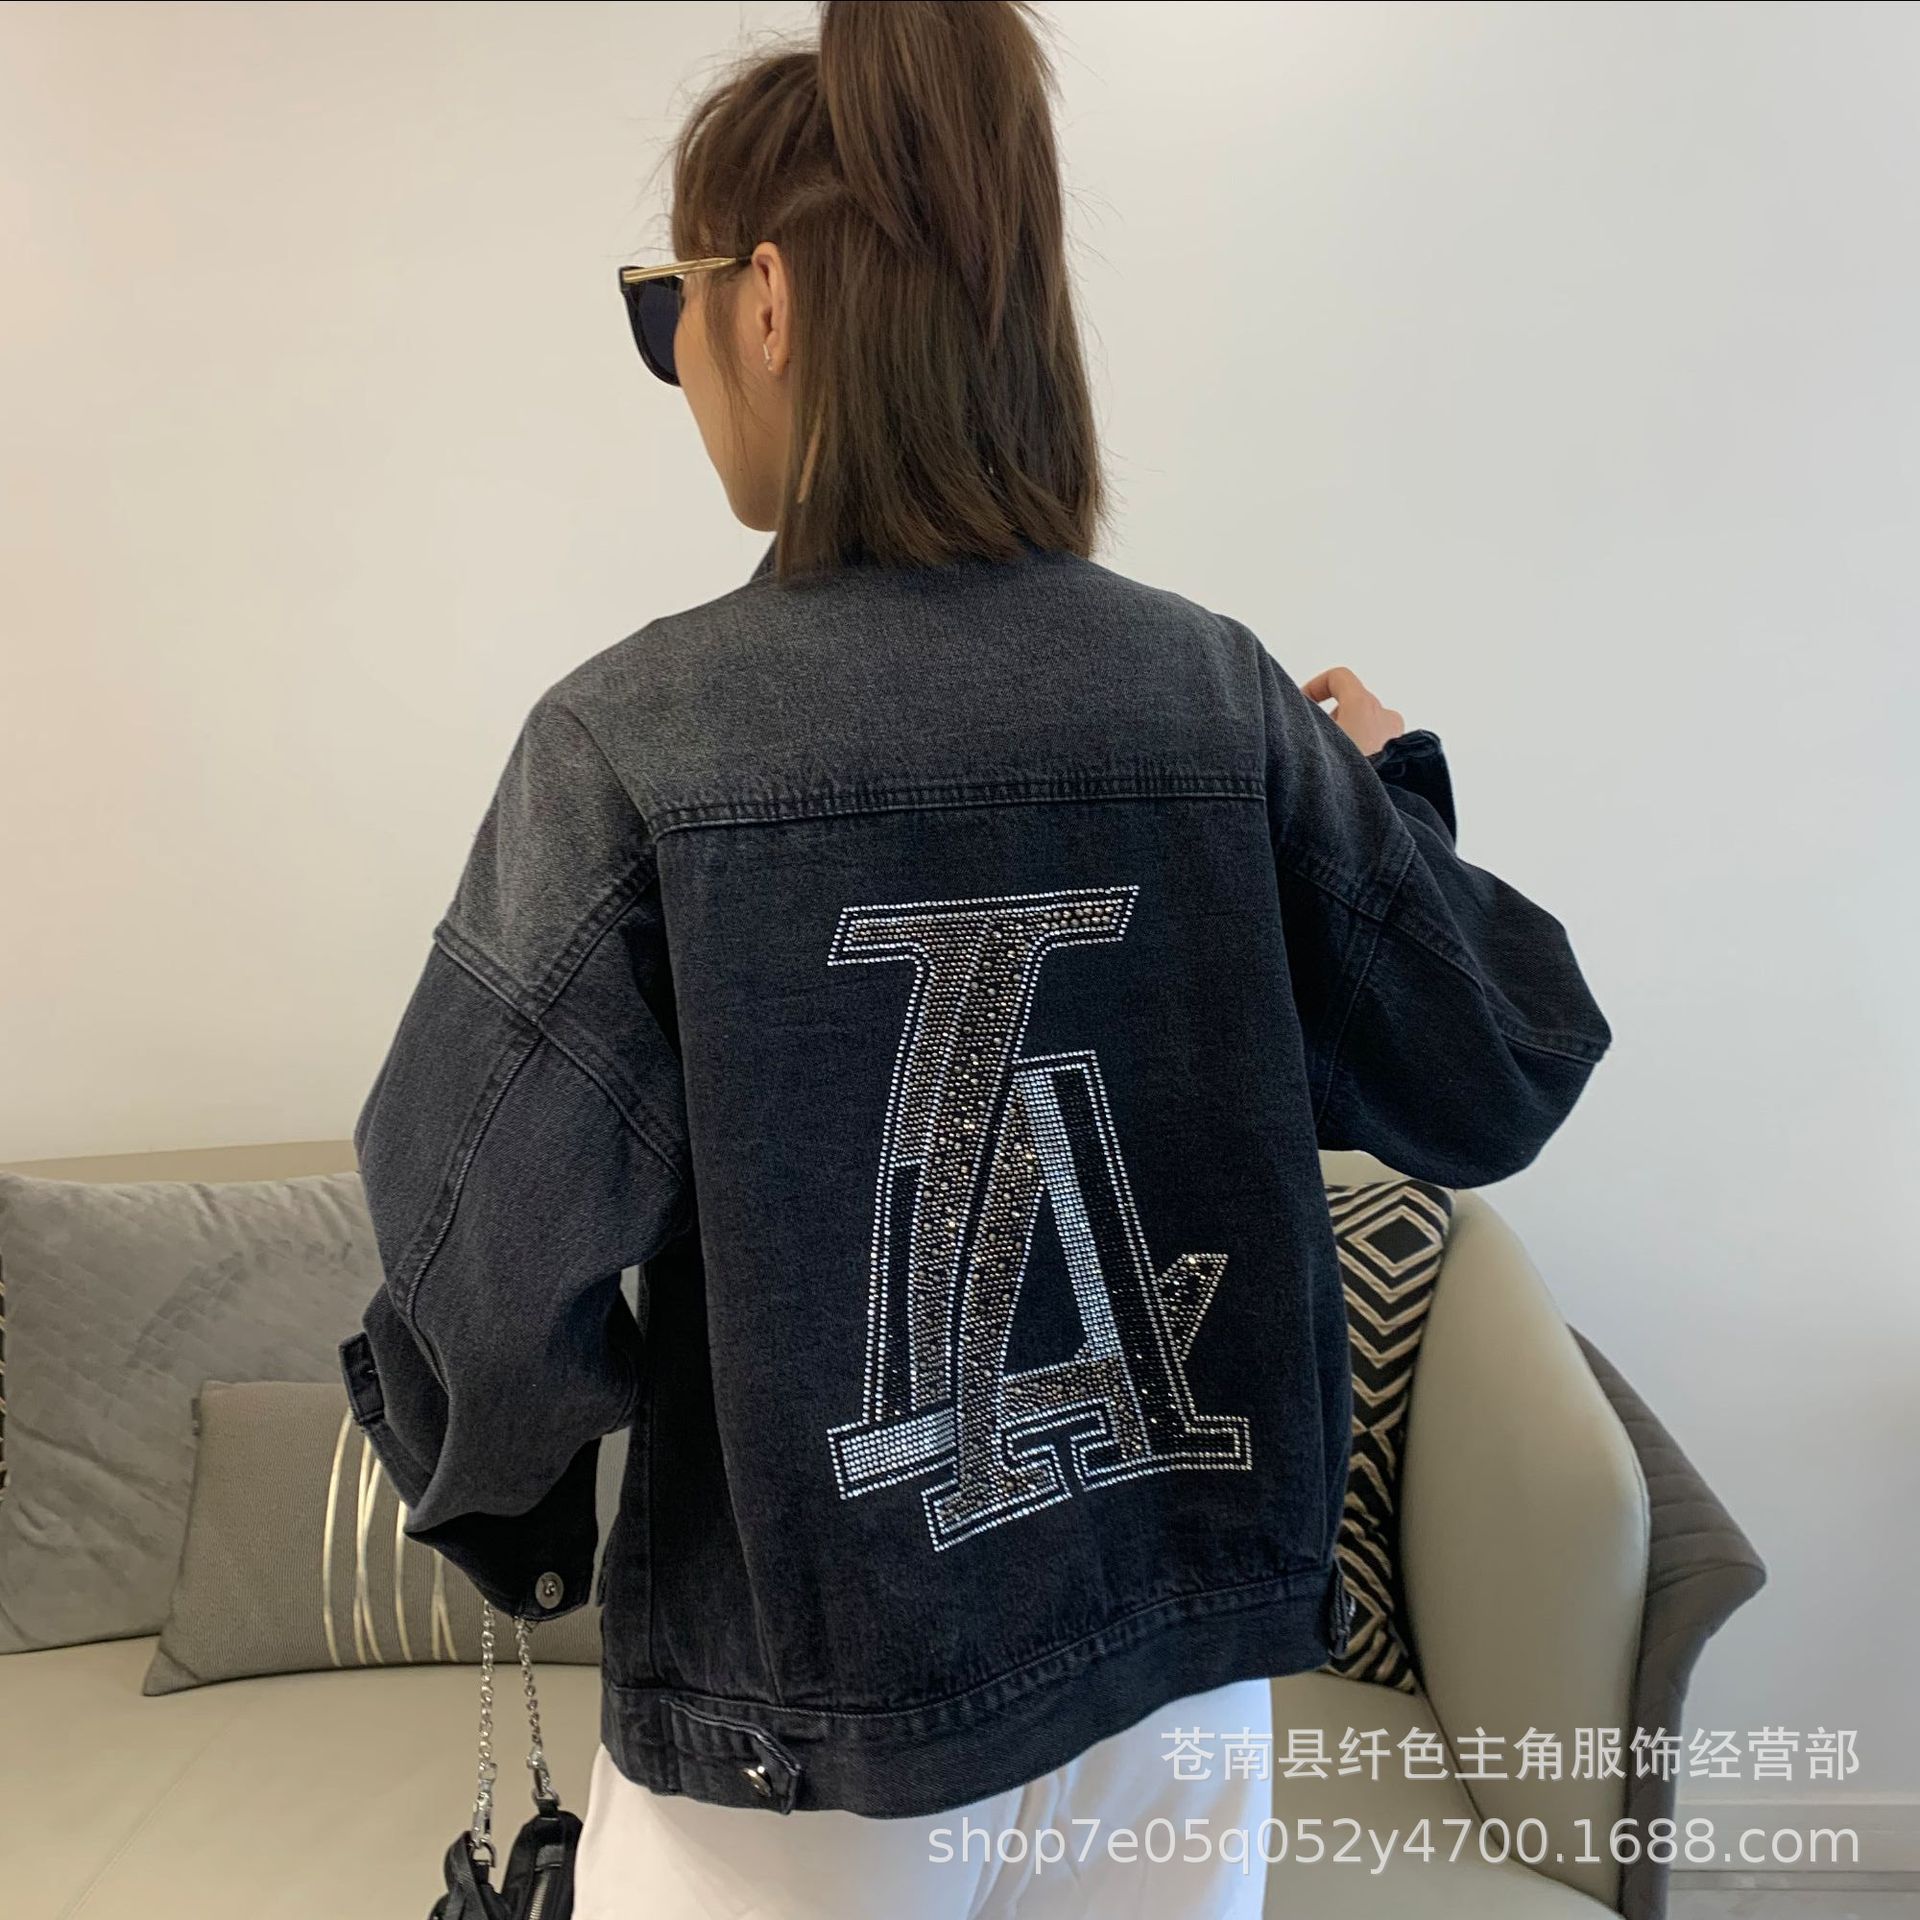 2020 Autumn Chaqueta have cash less than that is registered in the accounts heavy industry letter LA Sleeve of bat Simple models Hong Kong flavor Retro Trend